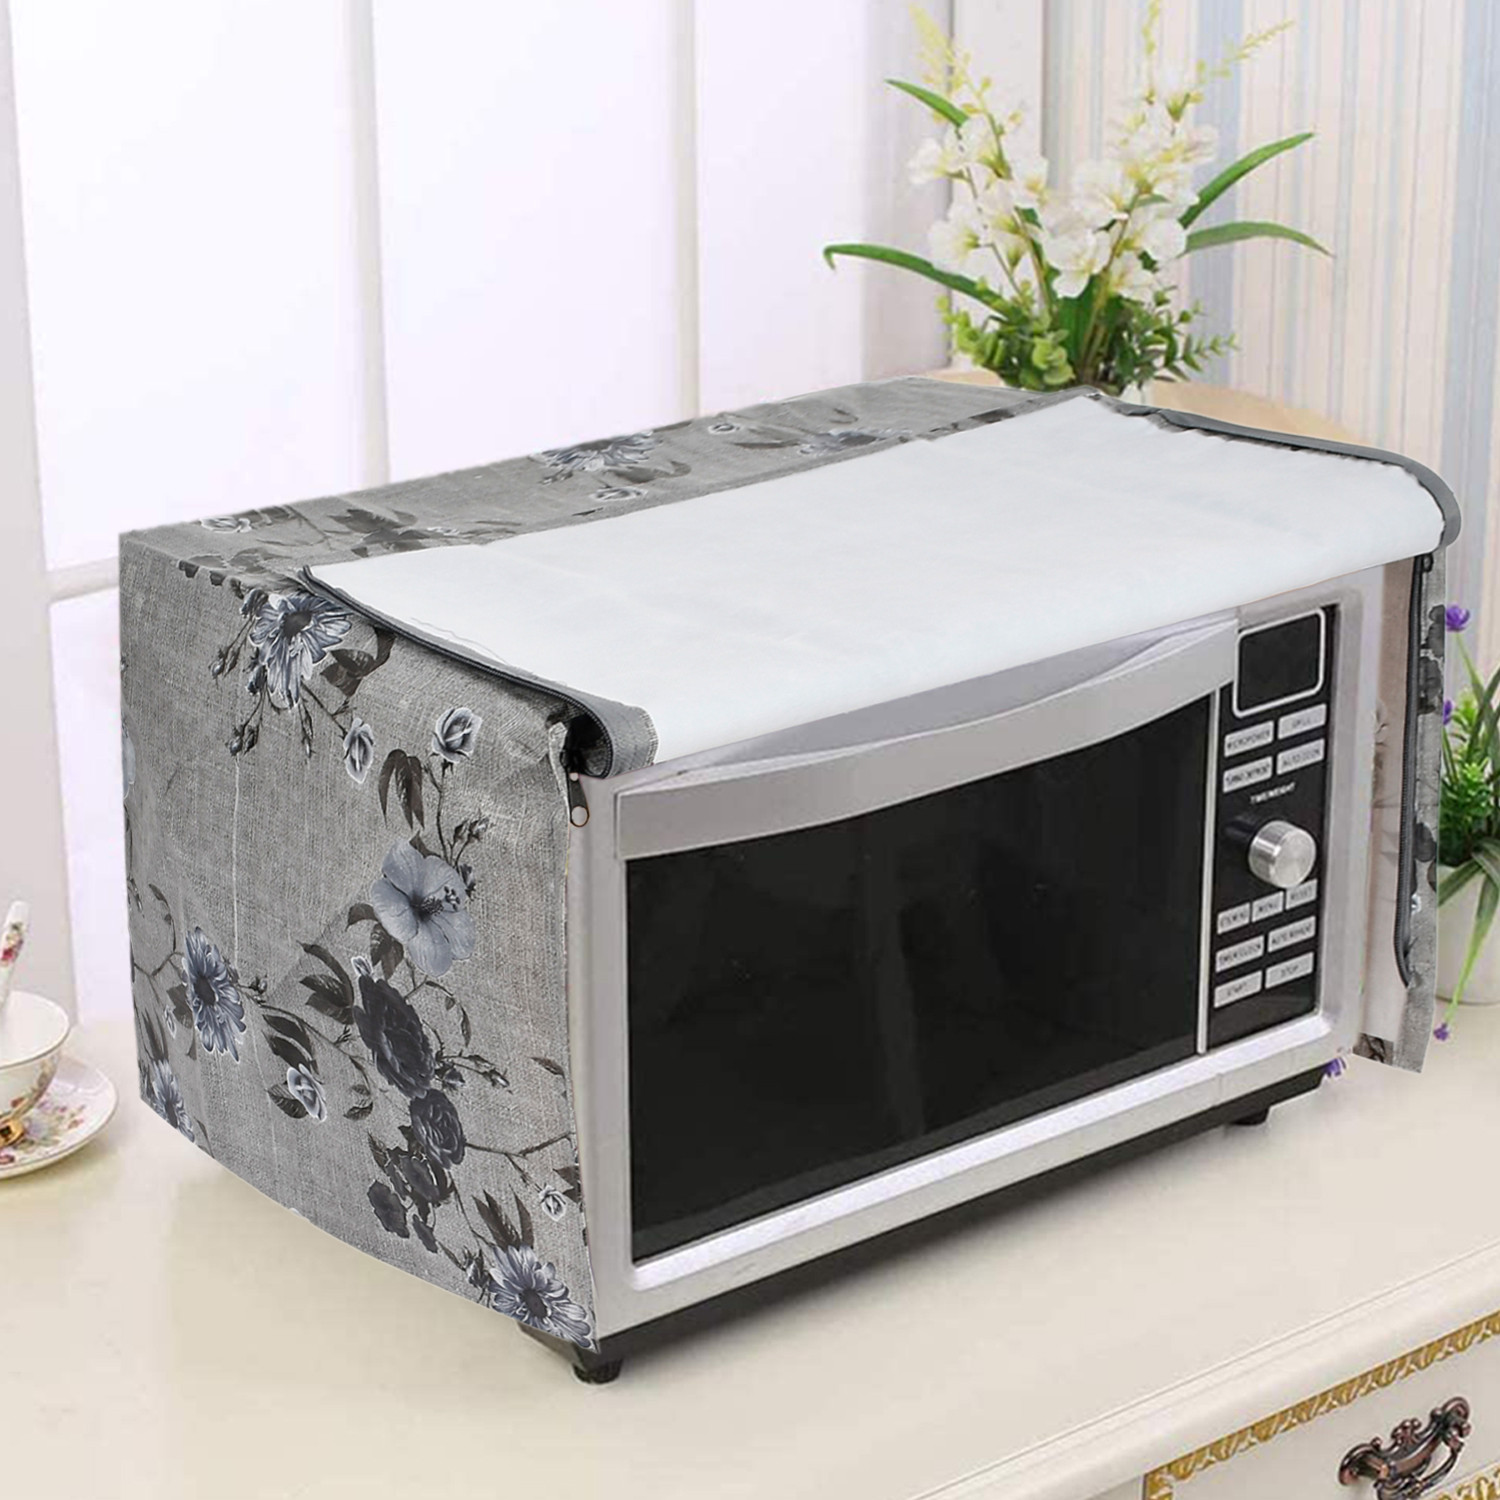 Kuber Industries PVC Flower Printed Microwave Oven Cover, Dustproof Machine Protector Cover,25 Ltr. (Grey)